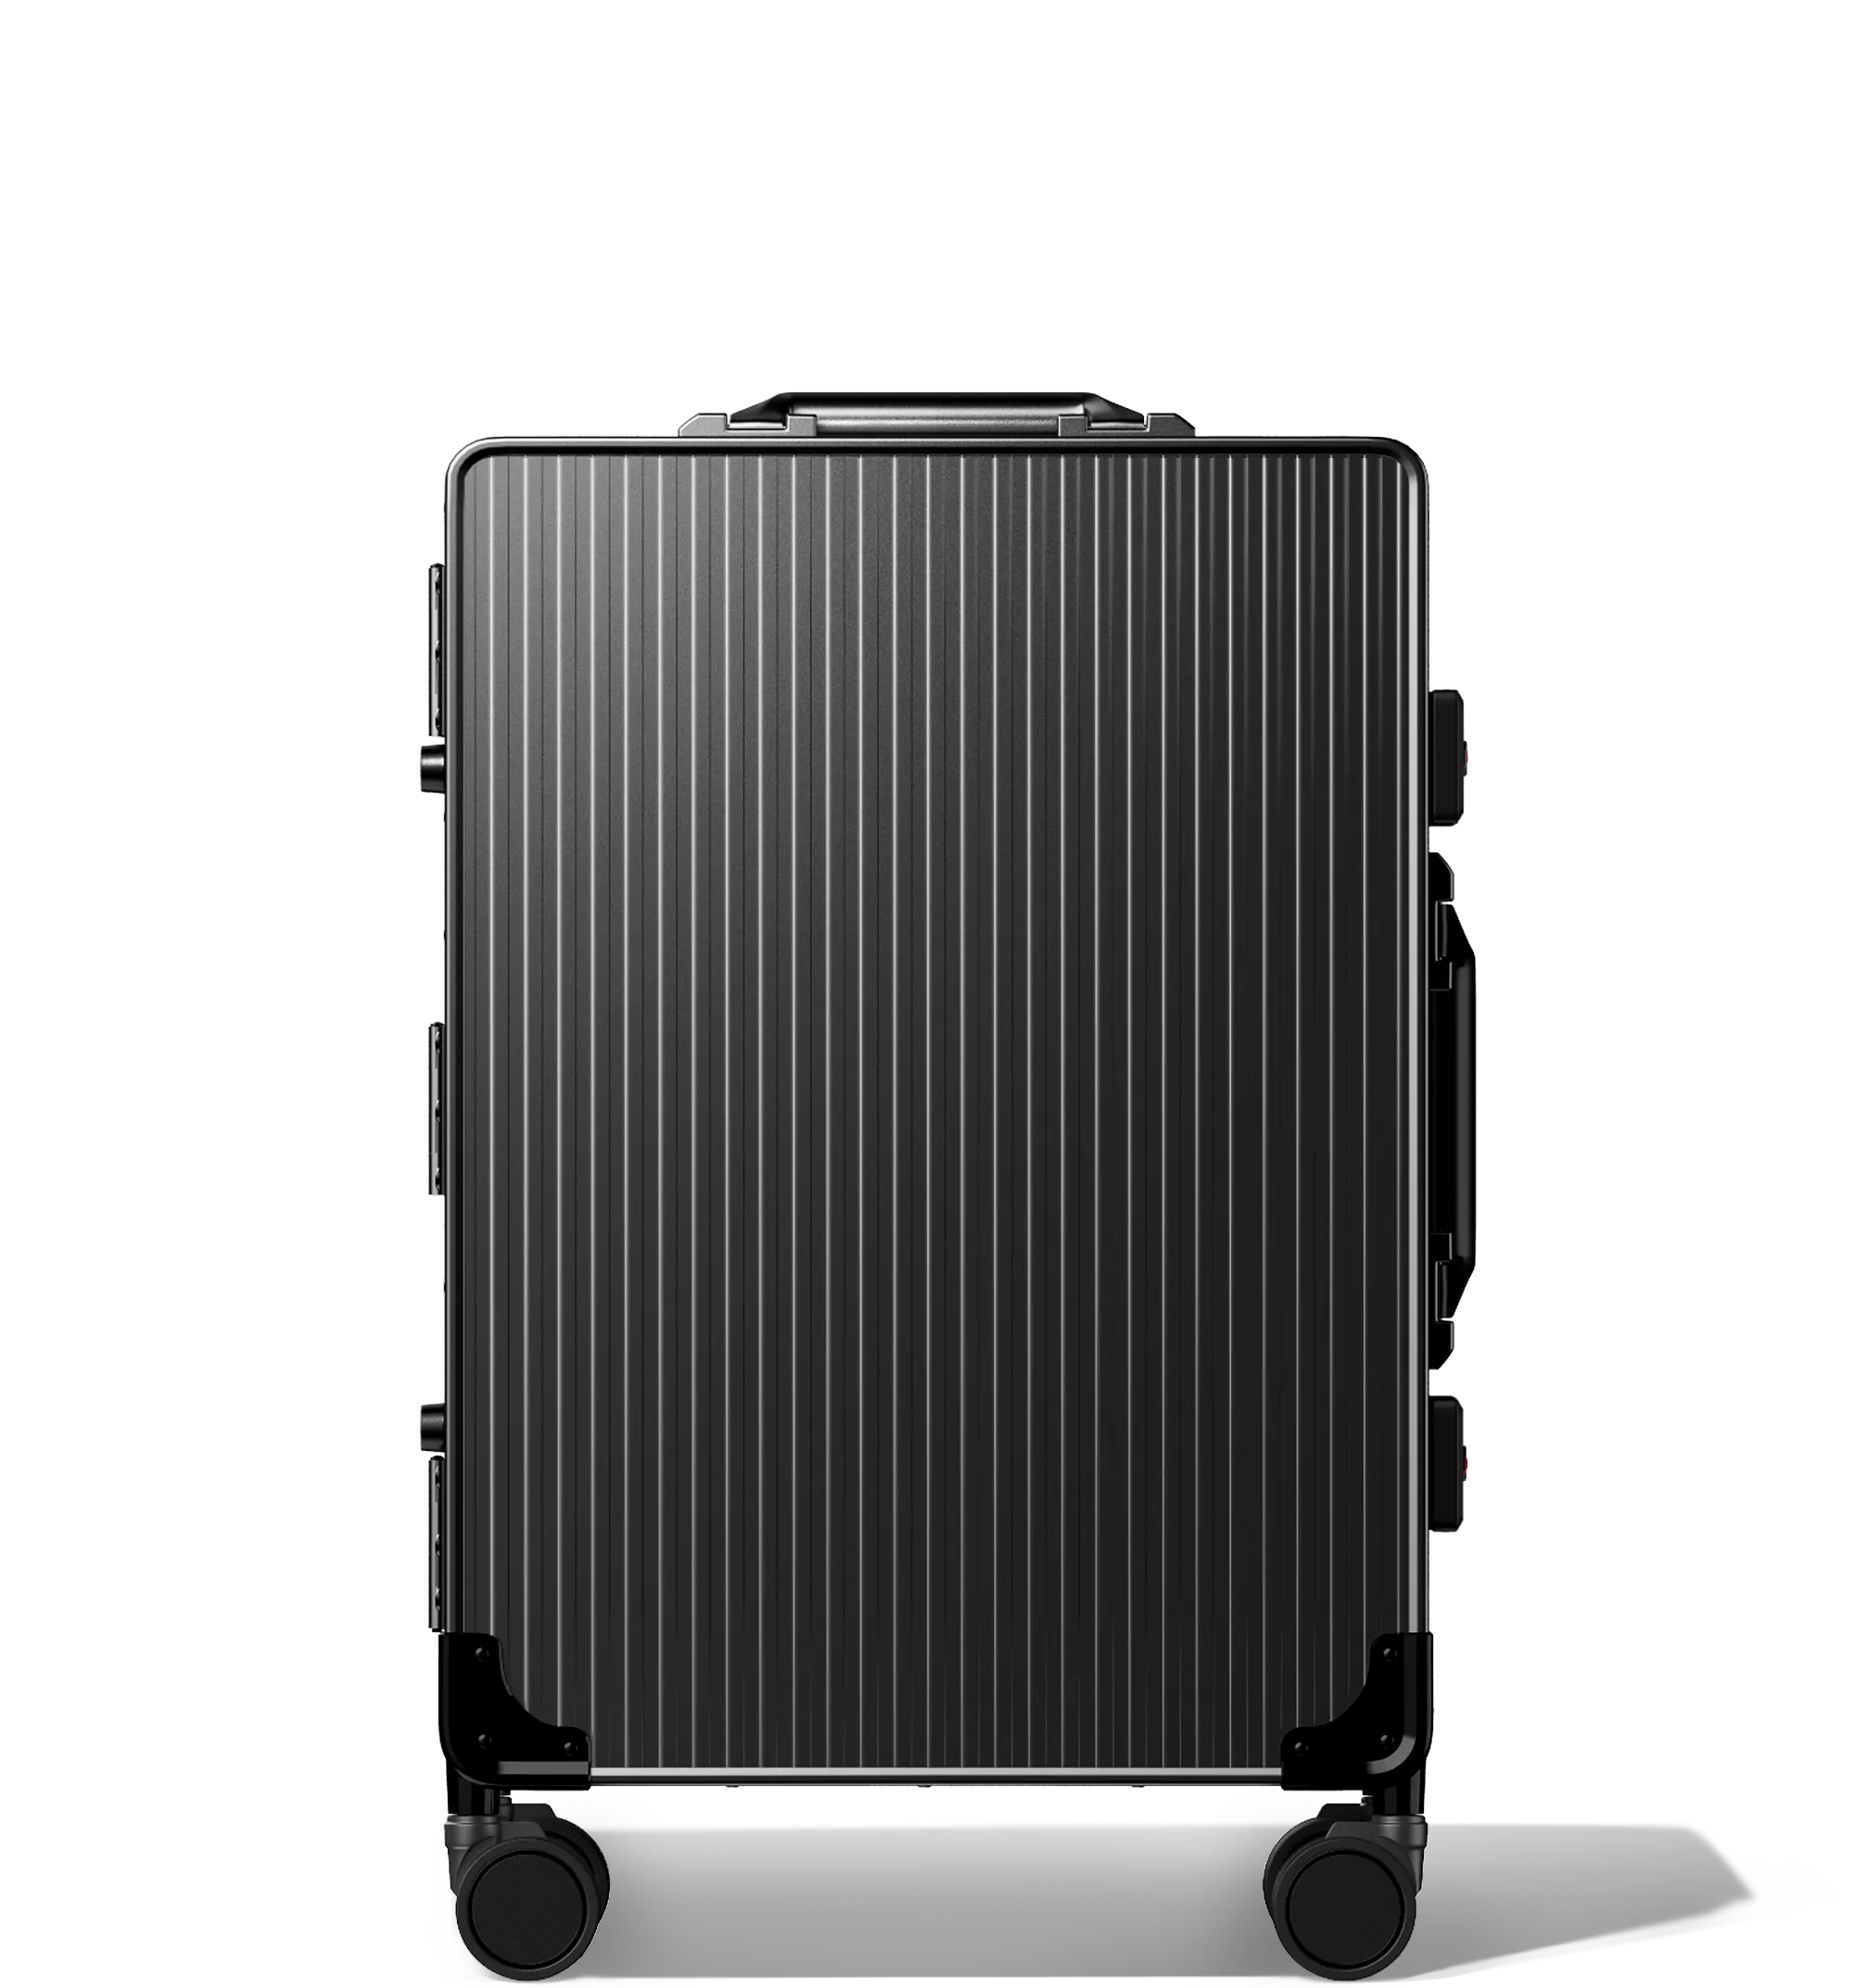 A vertical image of a Cabin in 56/20 luggage , upright, black hard-shell aluminium Luggage with a grooved surface design and multi-directional wheels, shown against a white background.